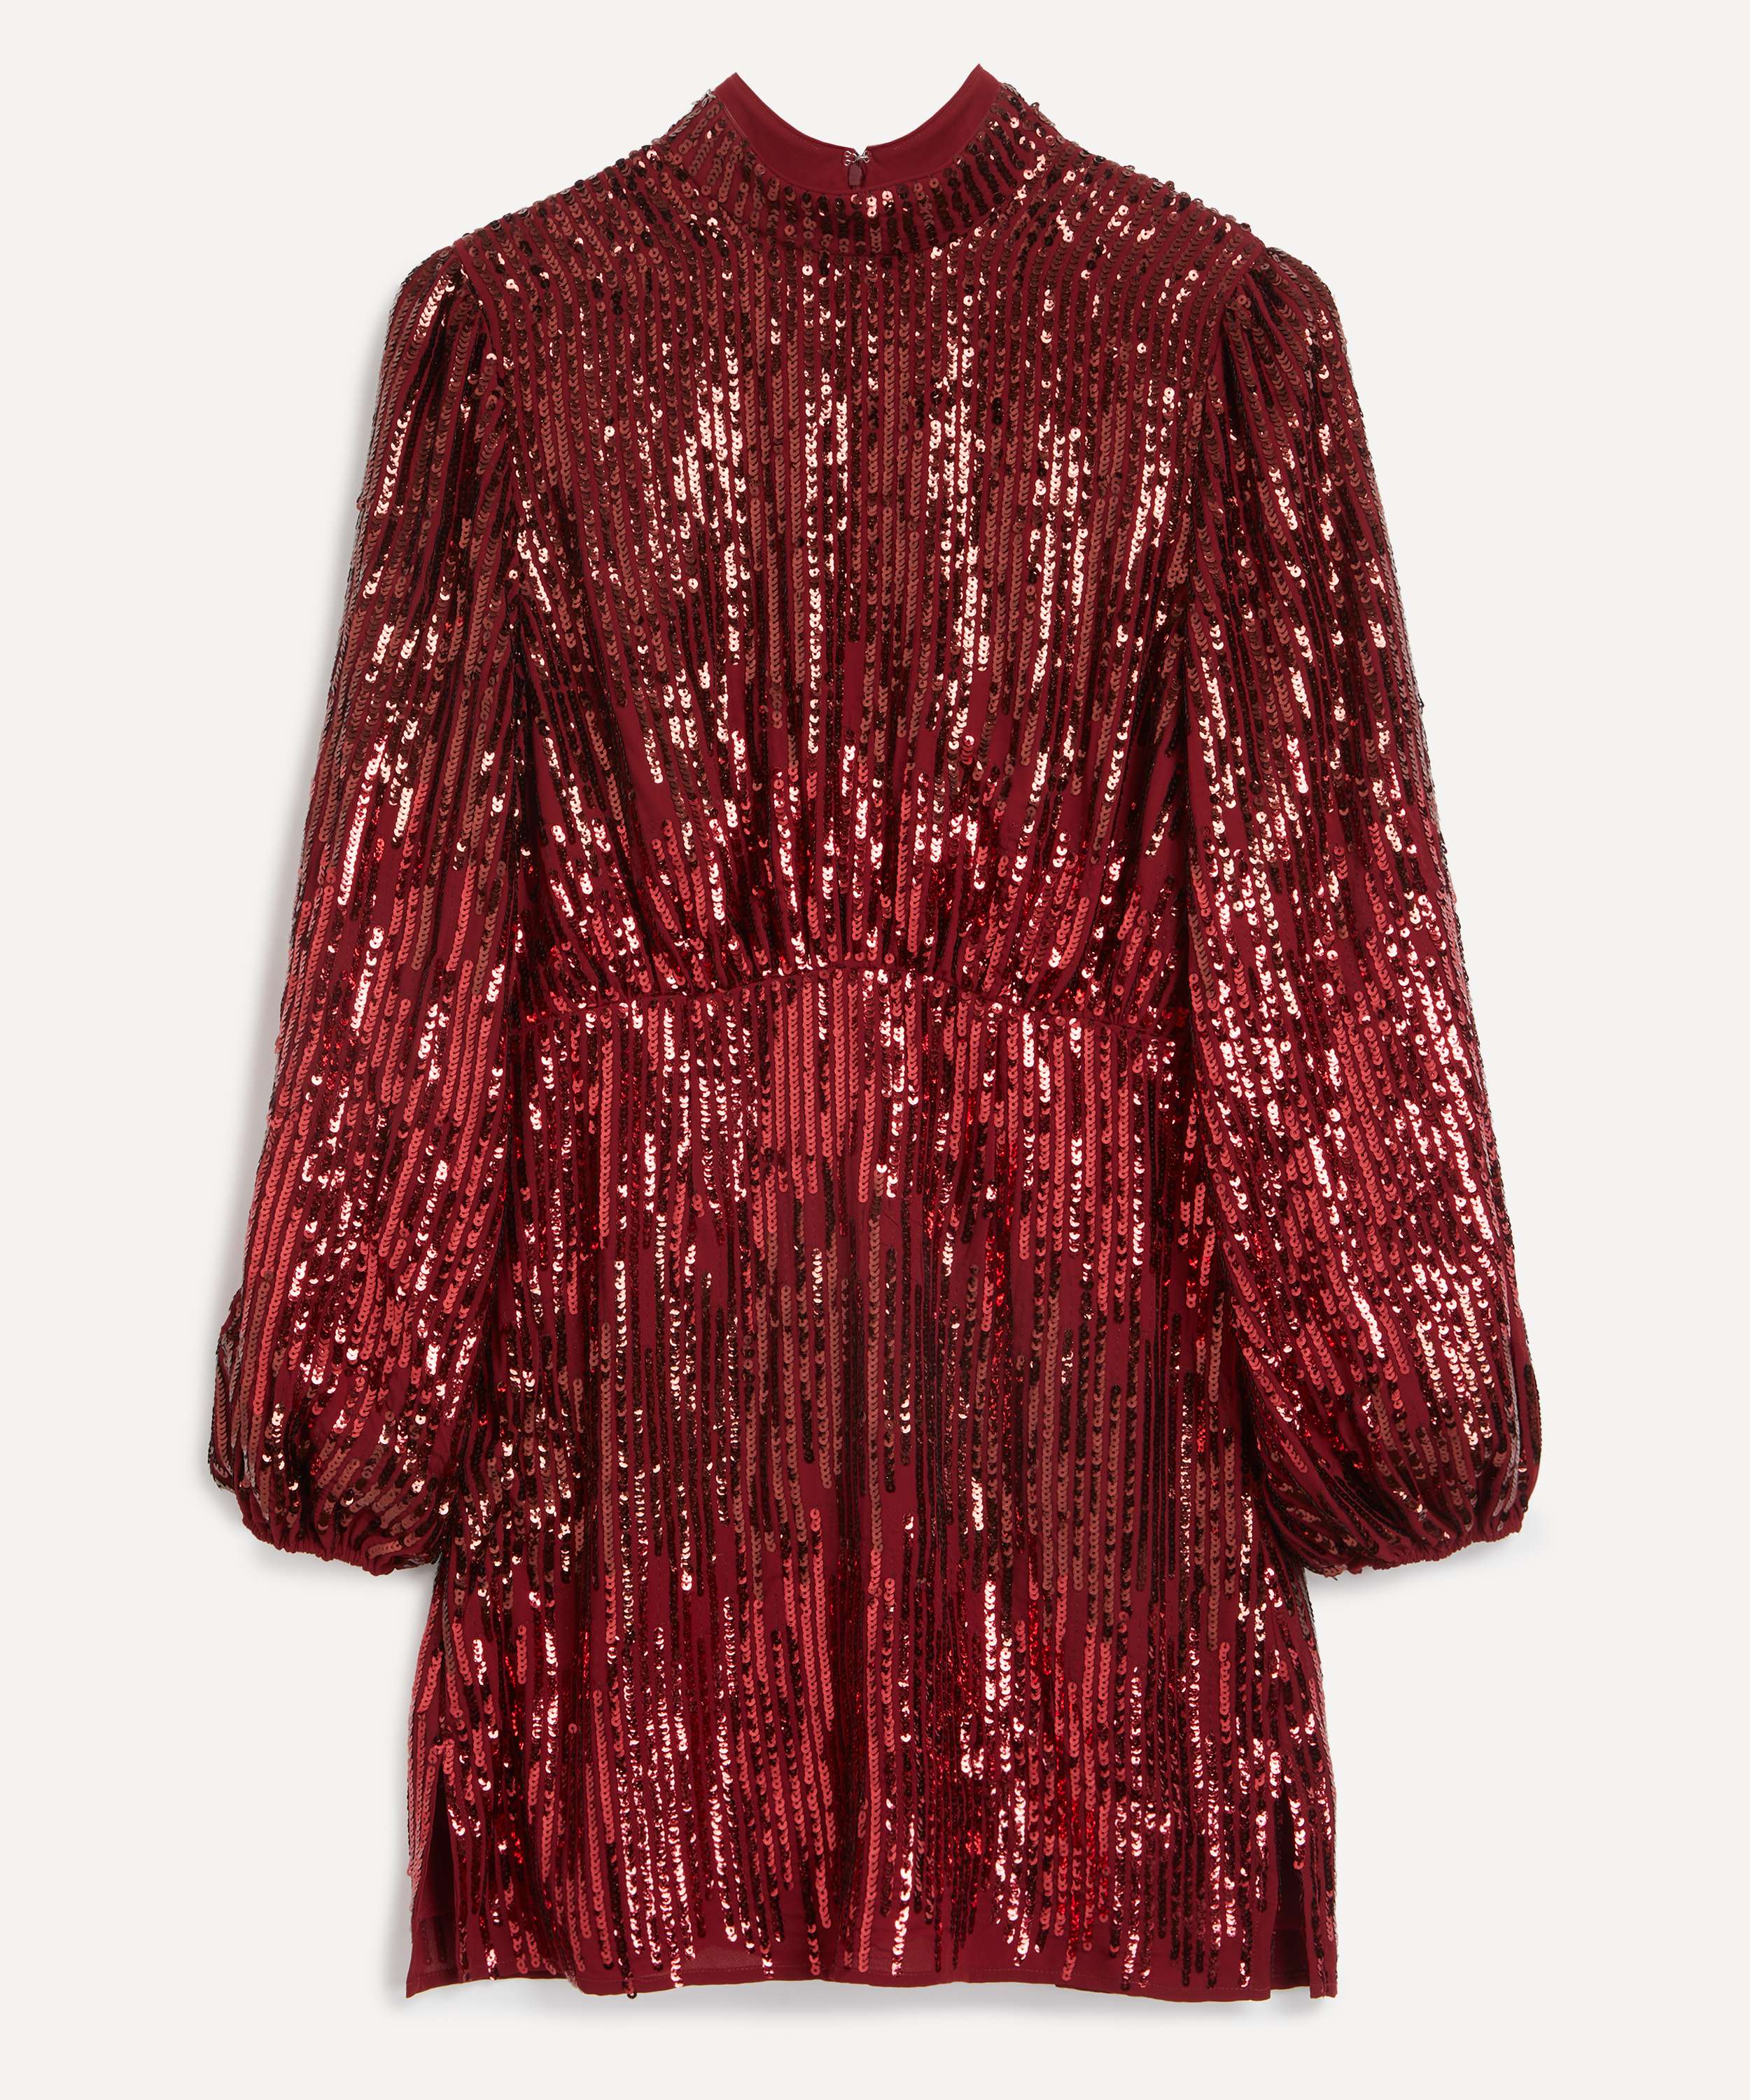 H&M's sequinned festive frock sends shoppers wild ahead of